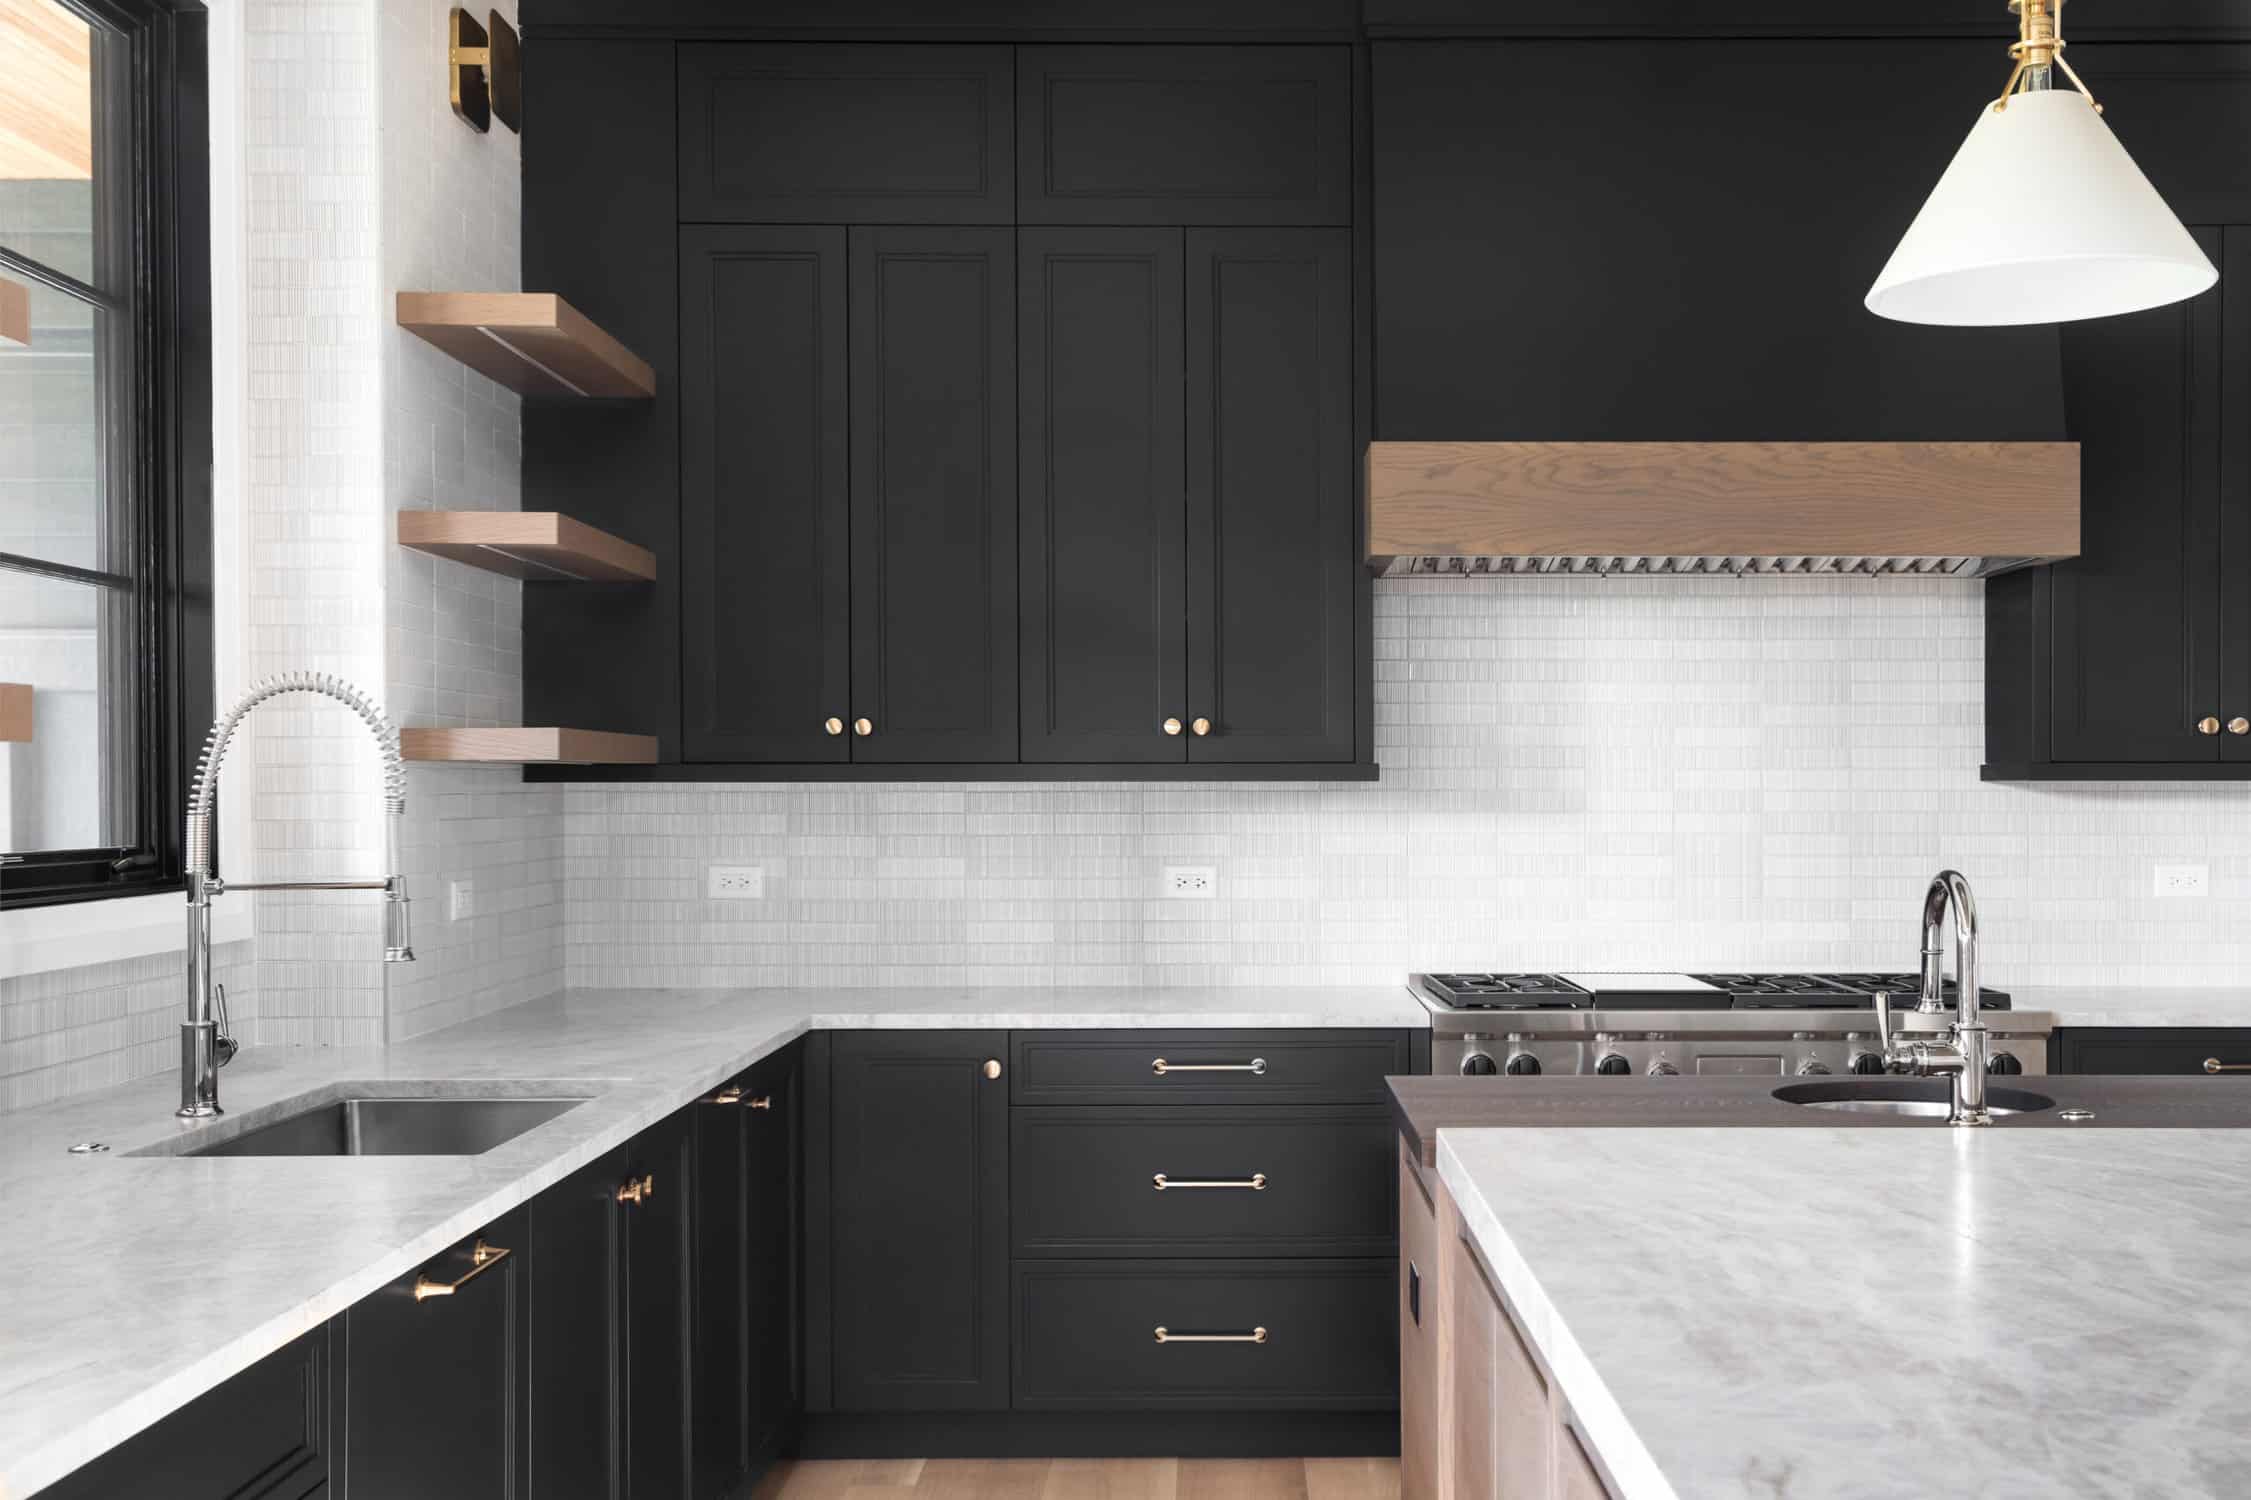 A black kitchen with stainless steel appliances.